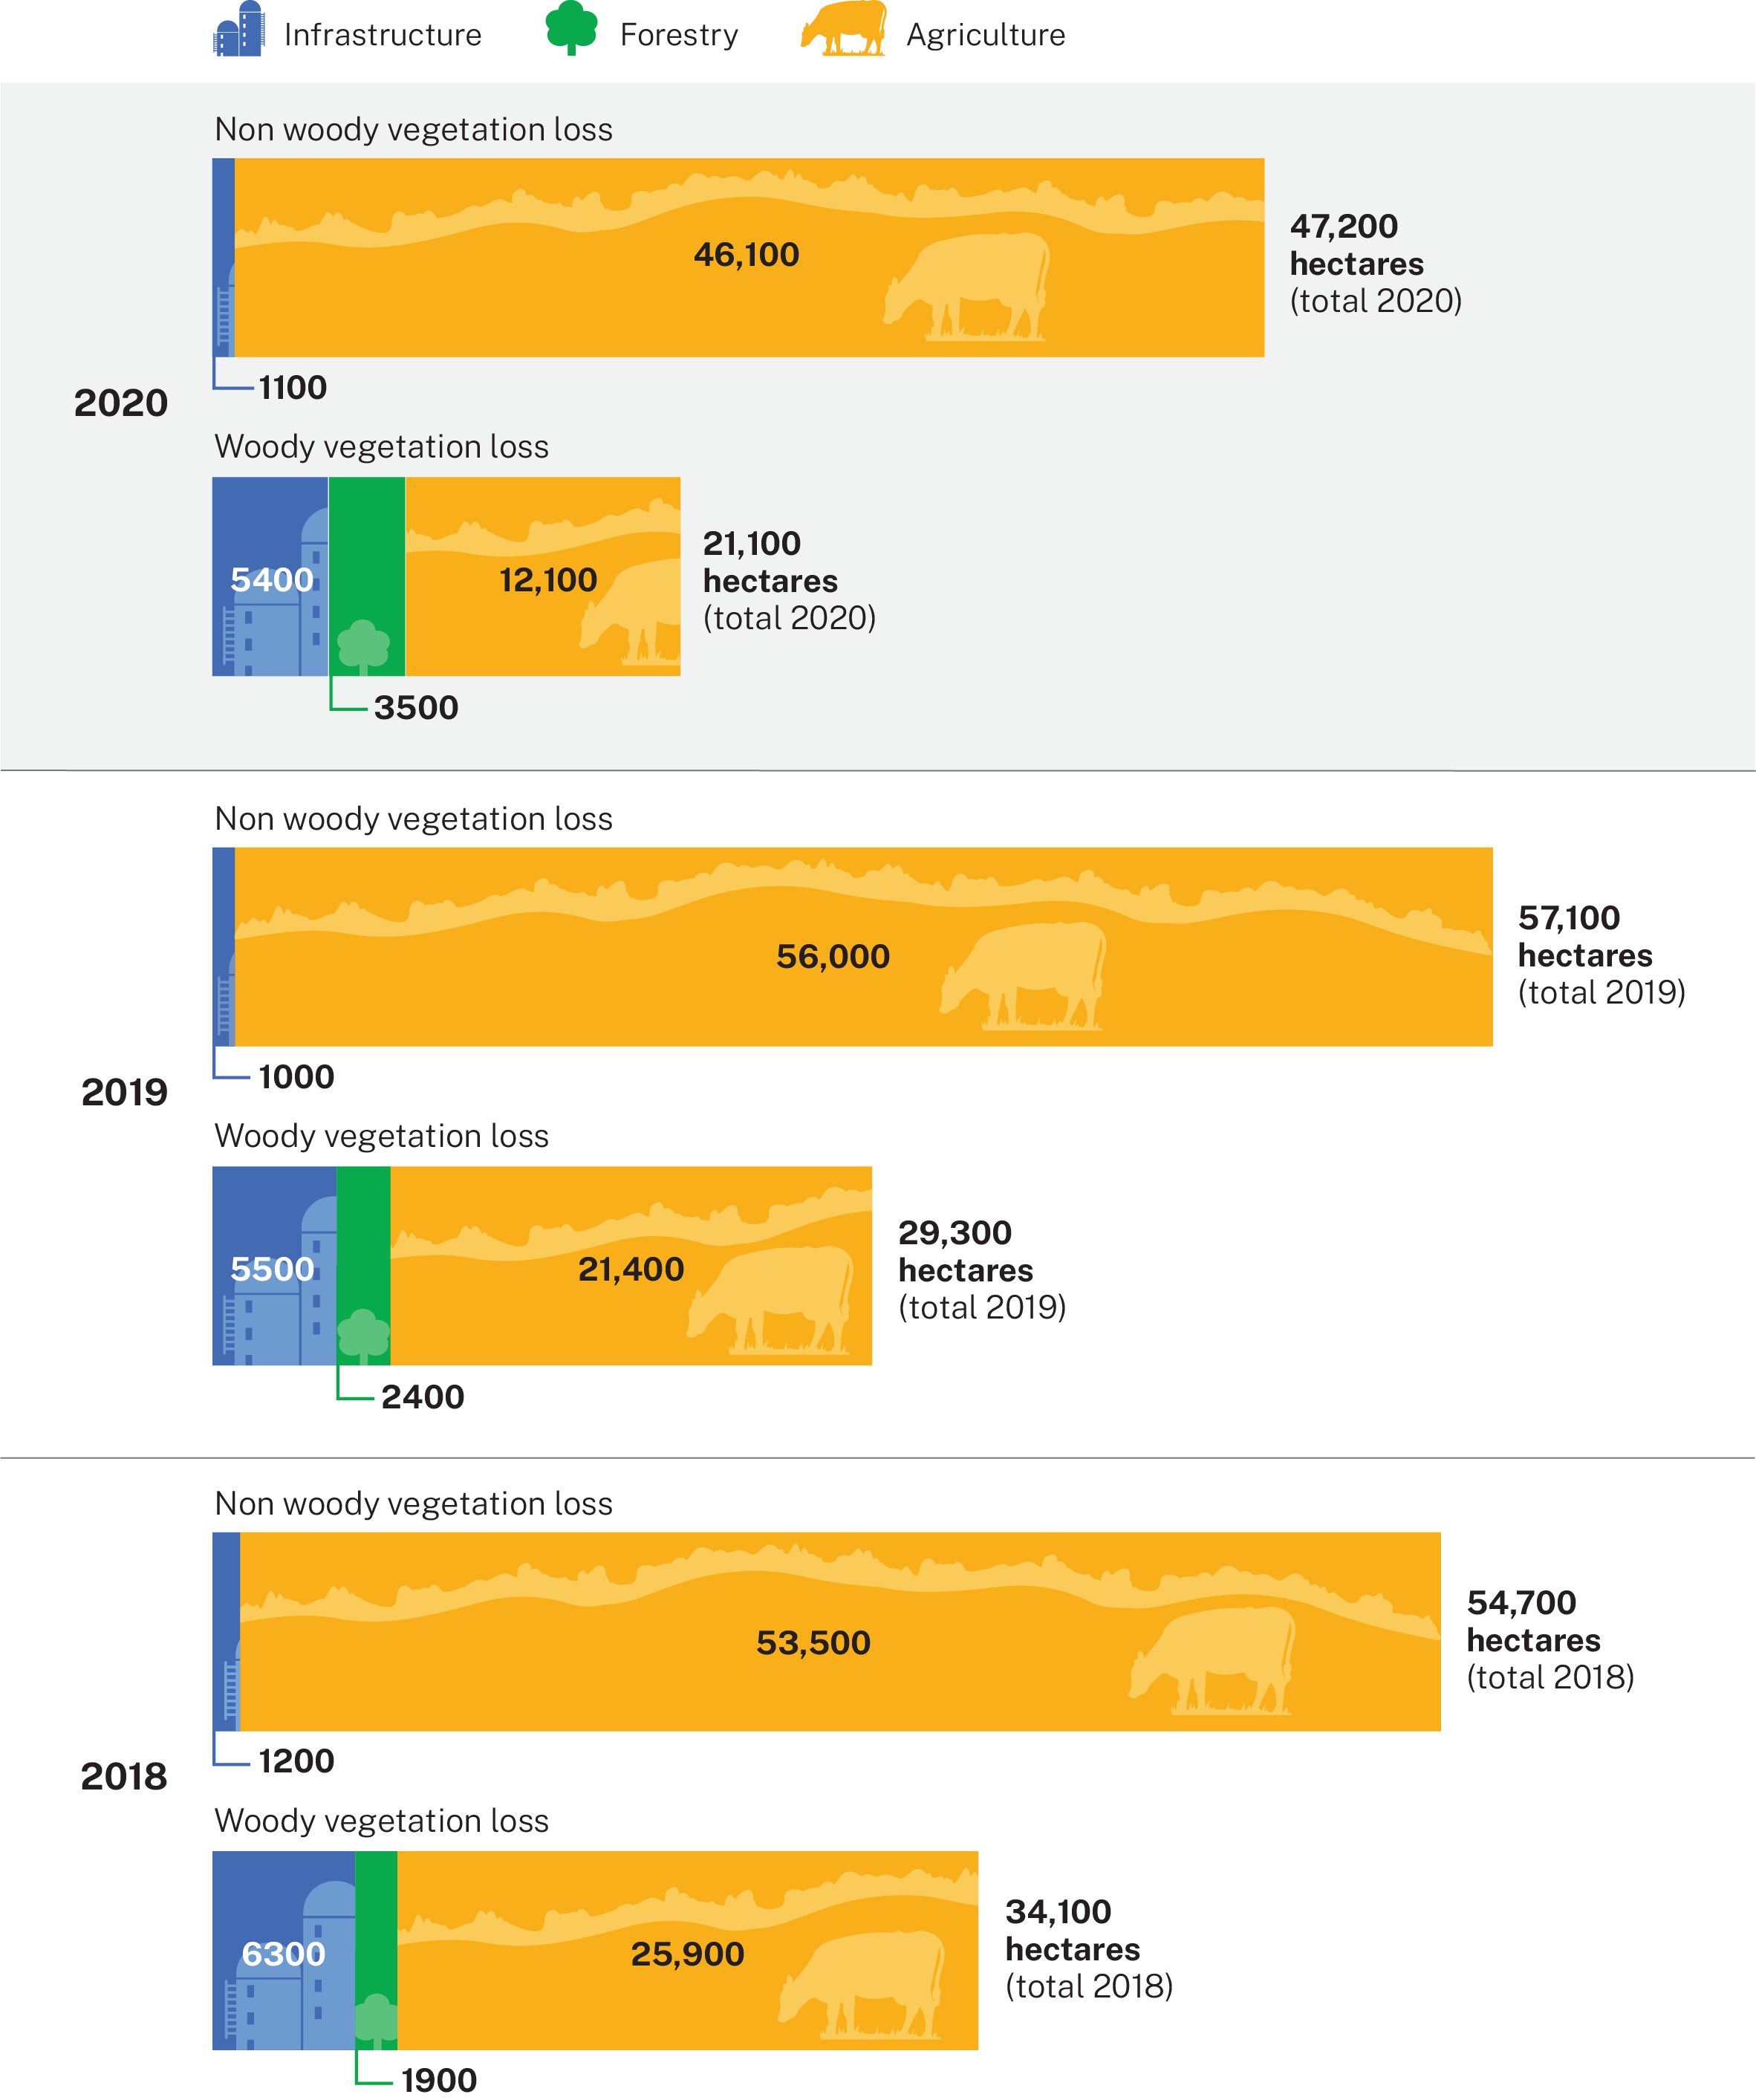 Infographic representing woody and non woody vegetation loss on rural regulated land in 2018, 2019 and 2020 according to landcover classes: agriculture, forestry and infrastructure.